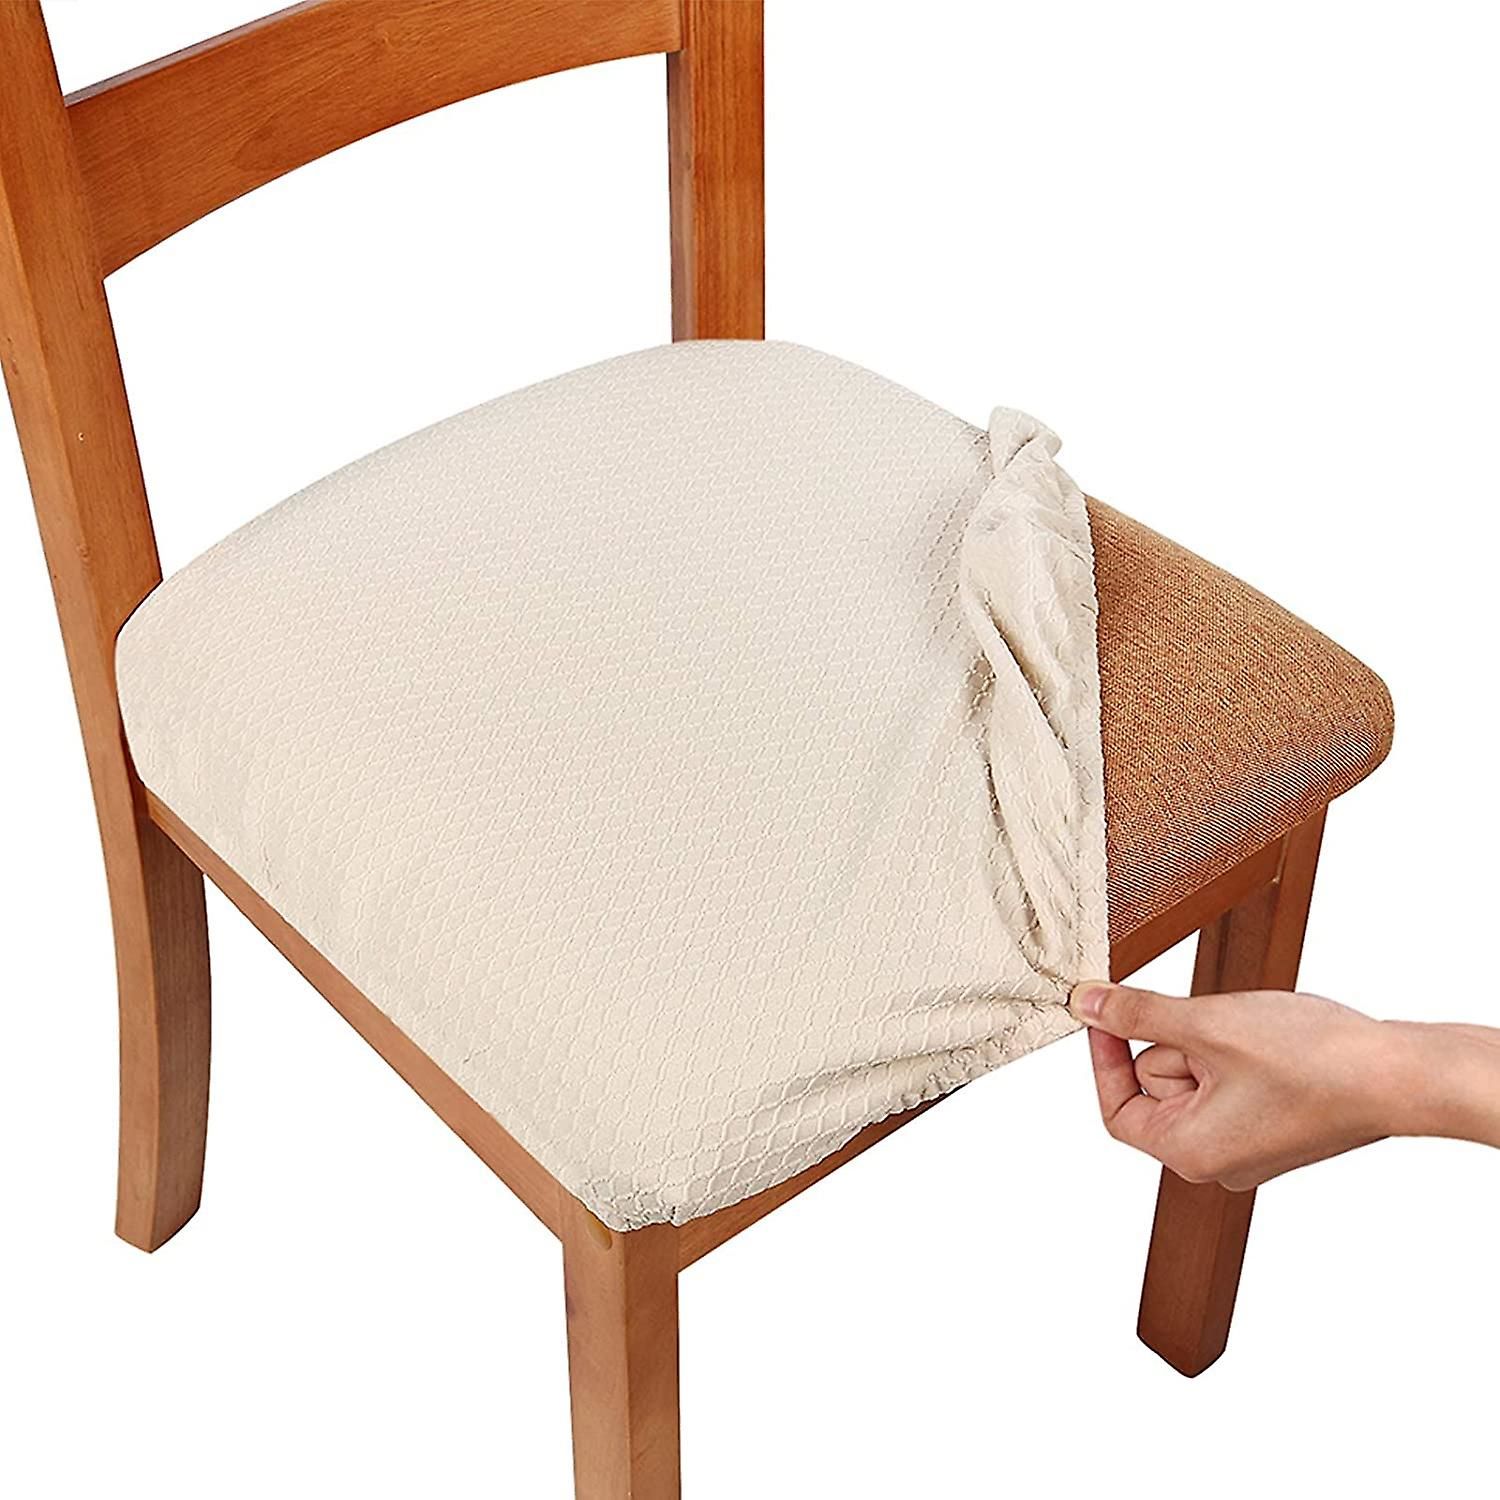 How To Make A Seat Cover For Dining Room Chair